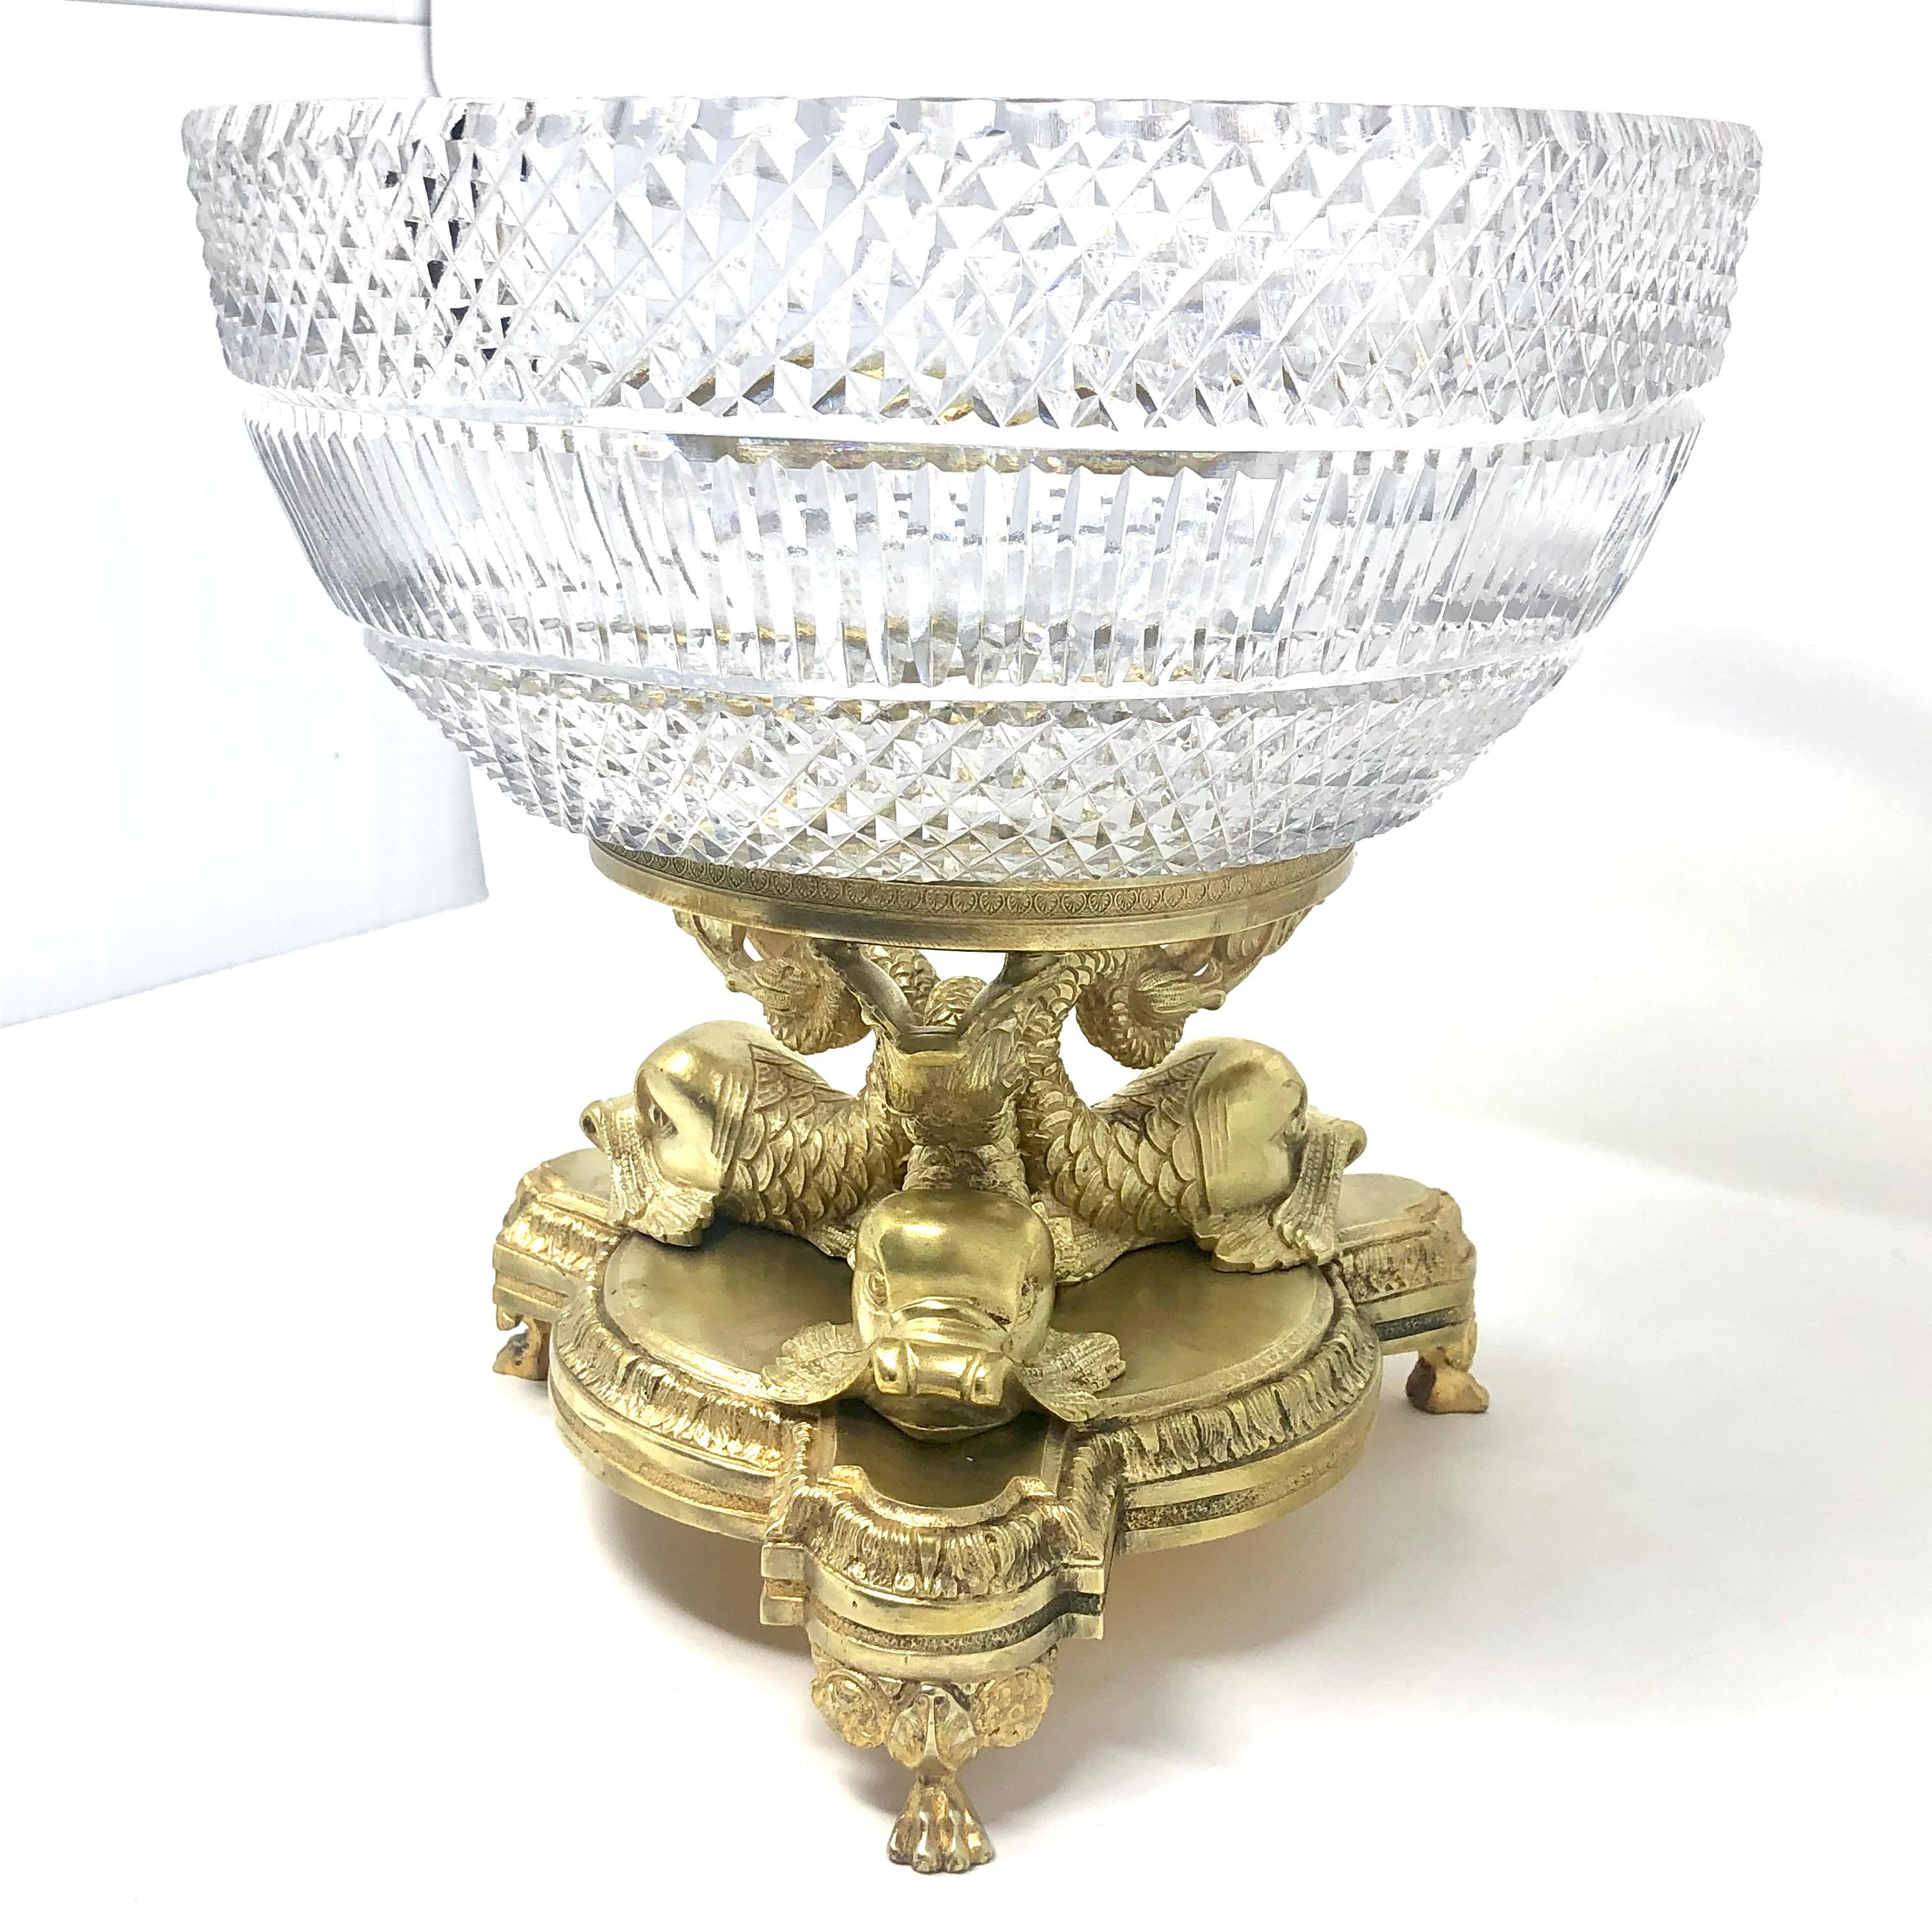 Exceptional quality Antique Austrian cut crystal and gold bronze centerpiece, 1900-1910. Crystal Bowl sits on a fine gold bronze stand with figural dolphinfish at base.